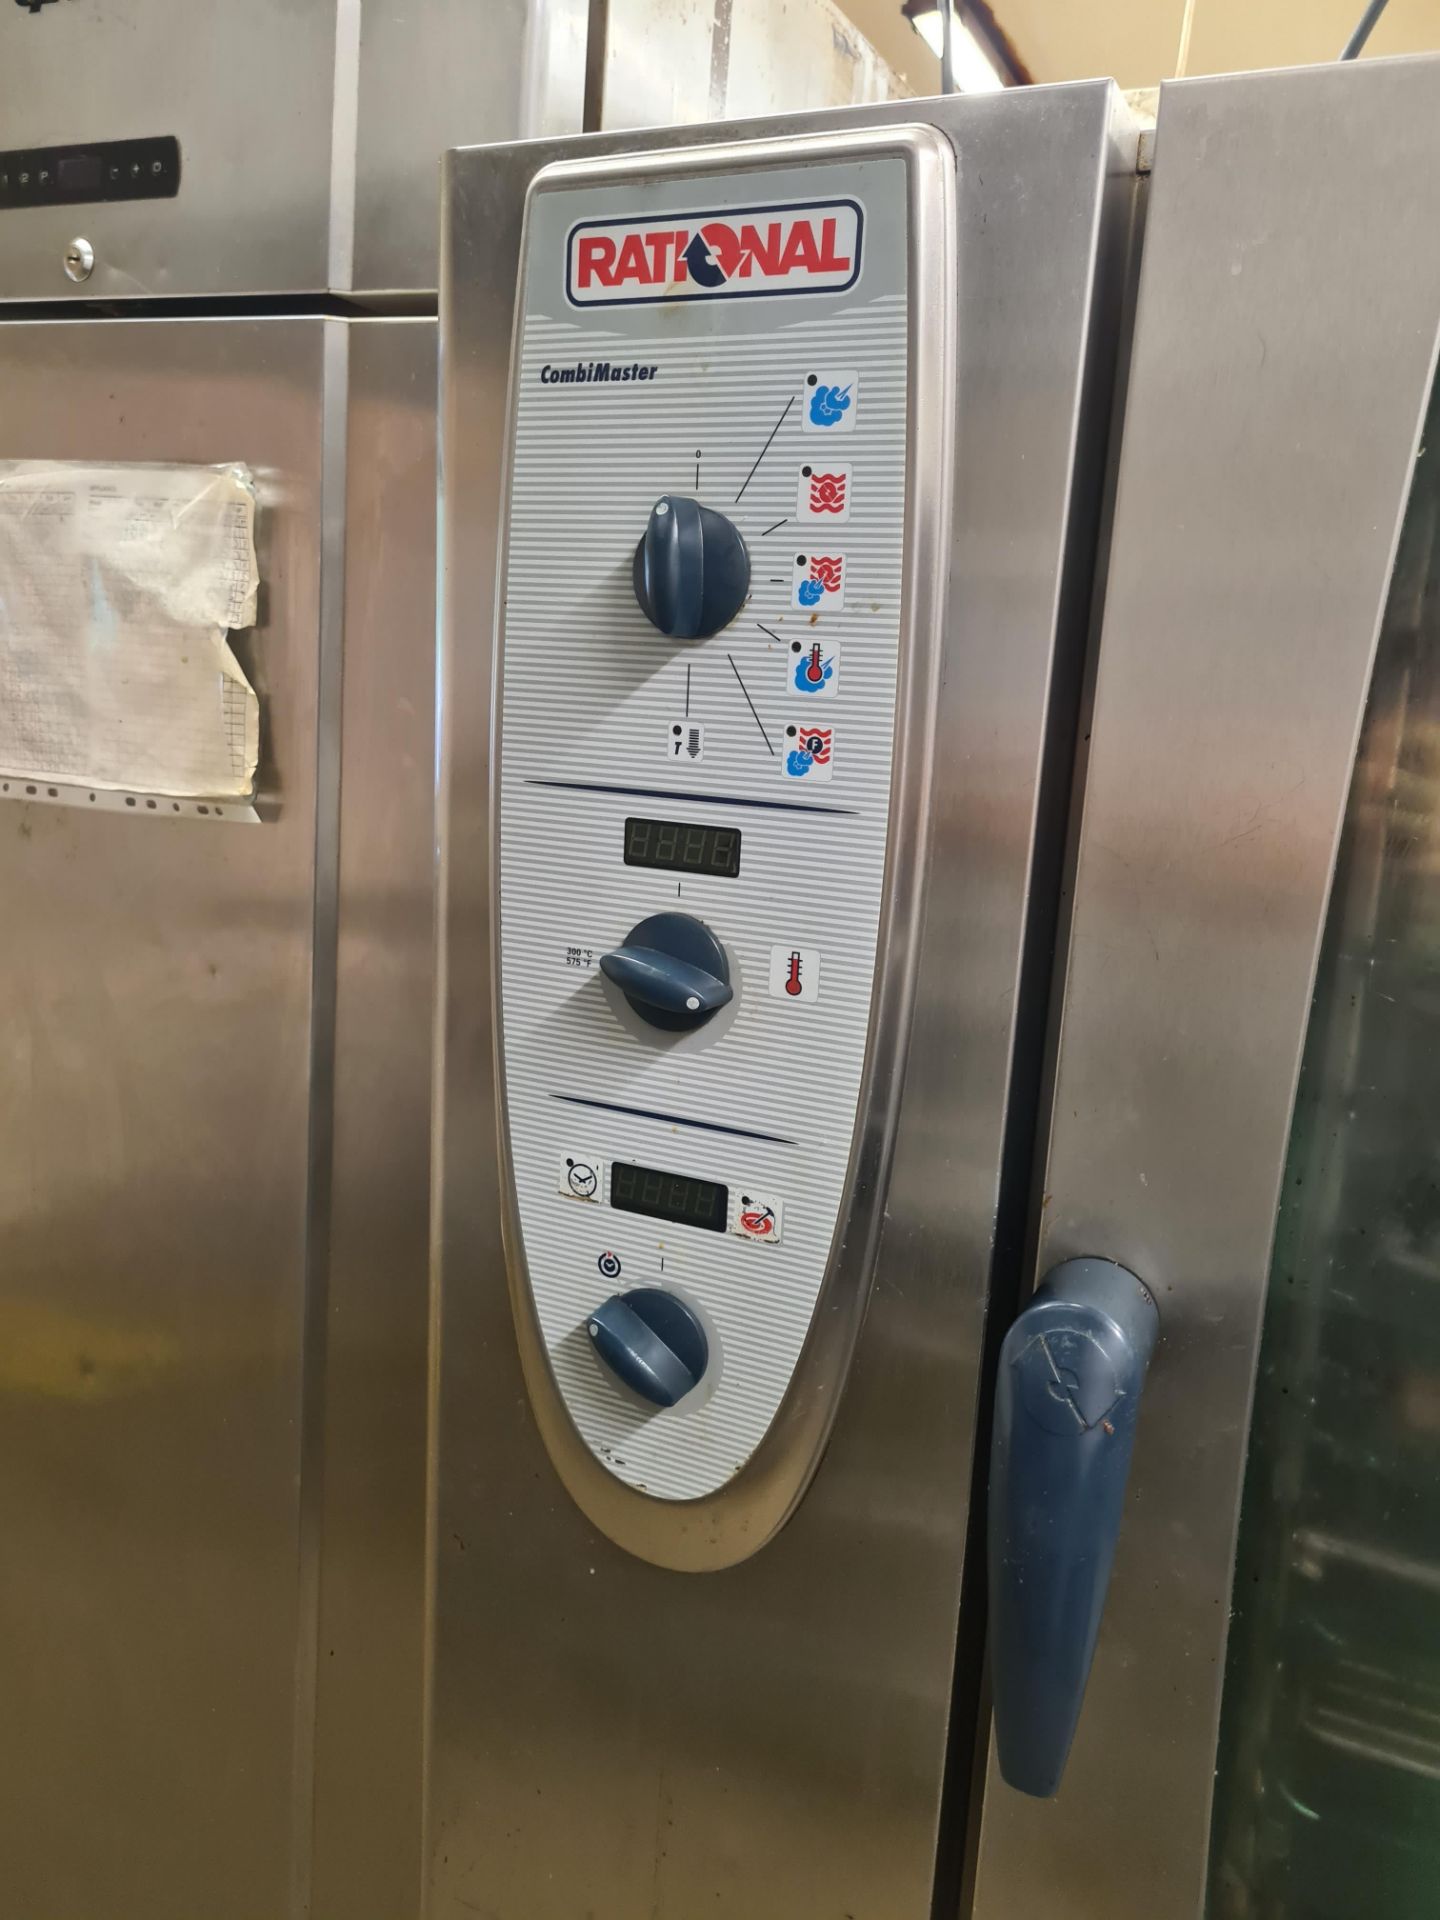 RATIONAL CombiMaster Stainless Steel Combination Oven c/w stand (415v) (Gas Needs Disconnecting - Image 4 of 5